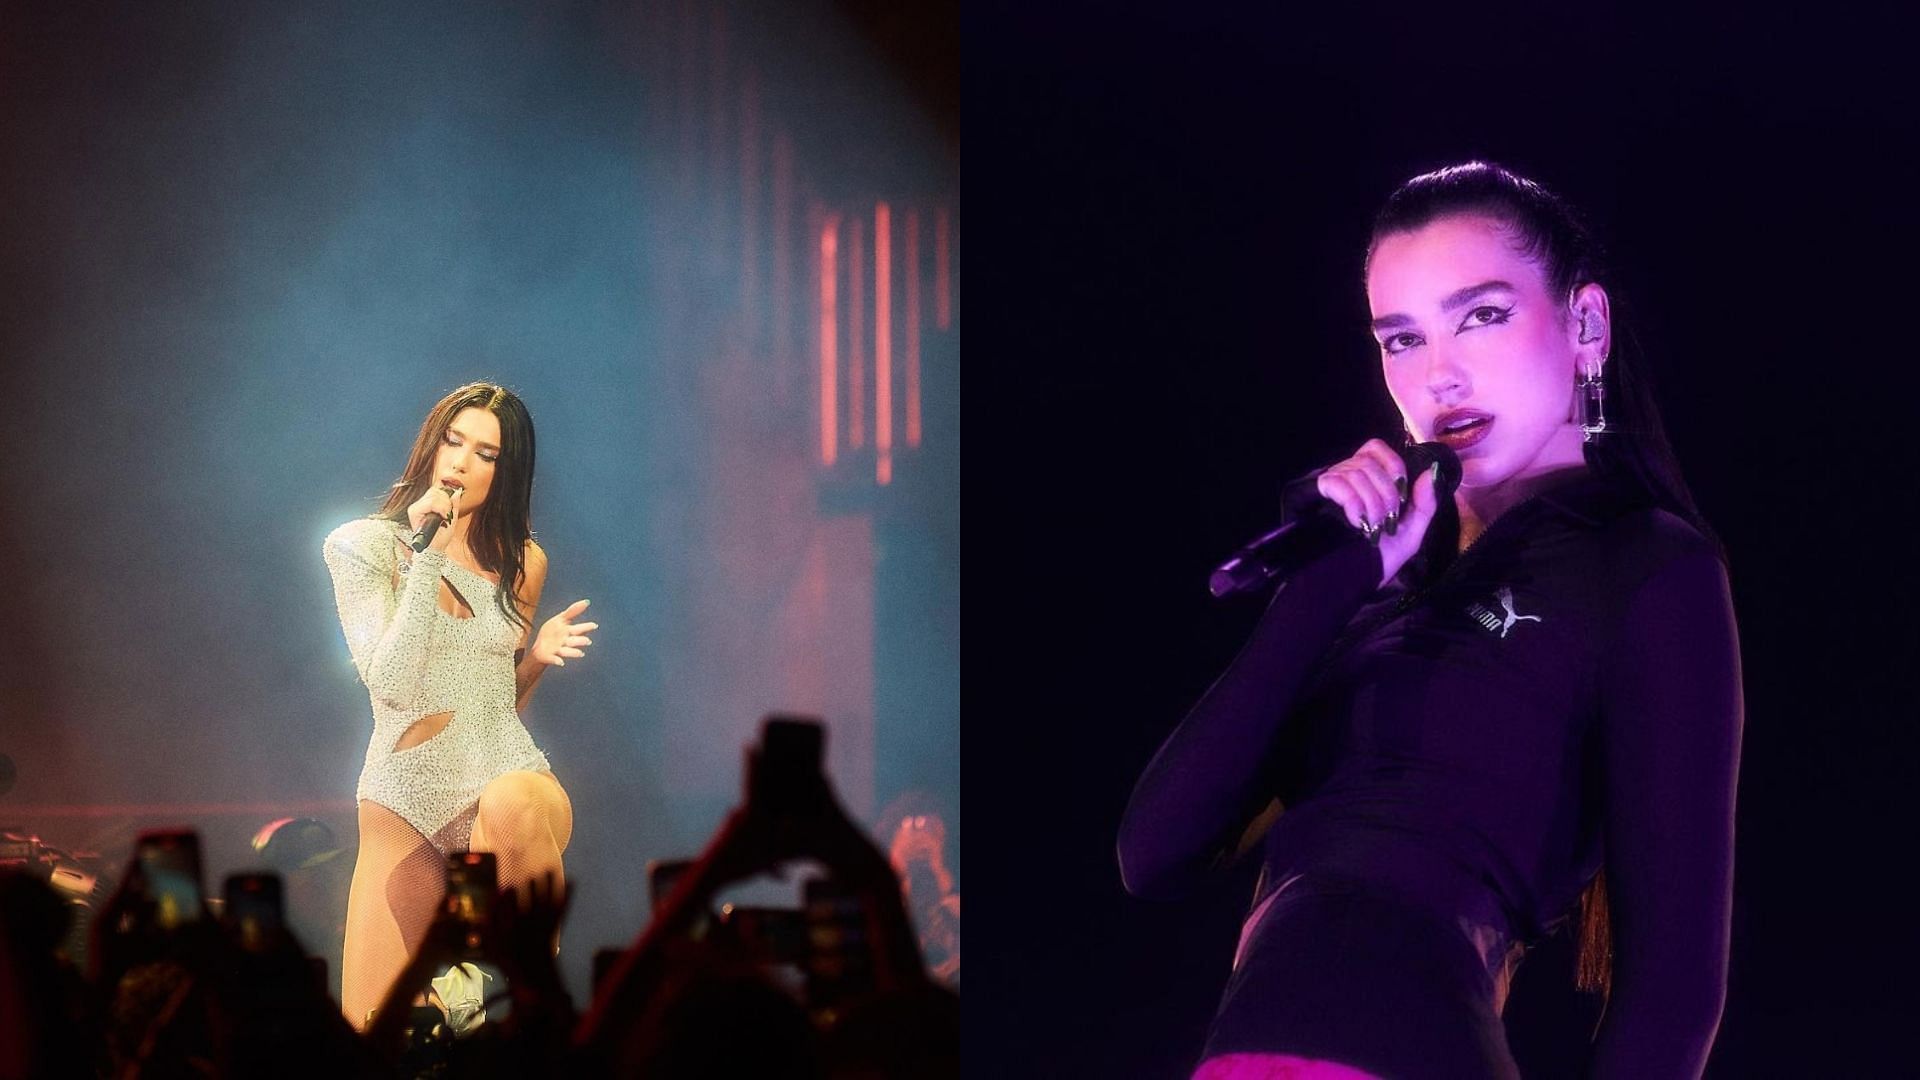 Dua Lipa has been hit with another copyright lawsuit in less than a week over Levitating (Images via Twitter/ @DuaLipa)